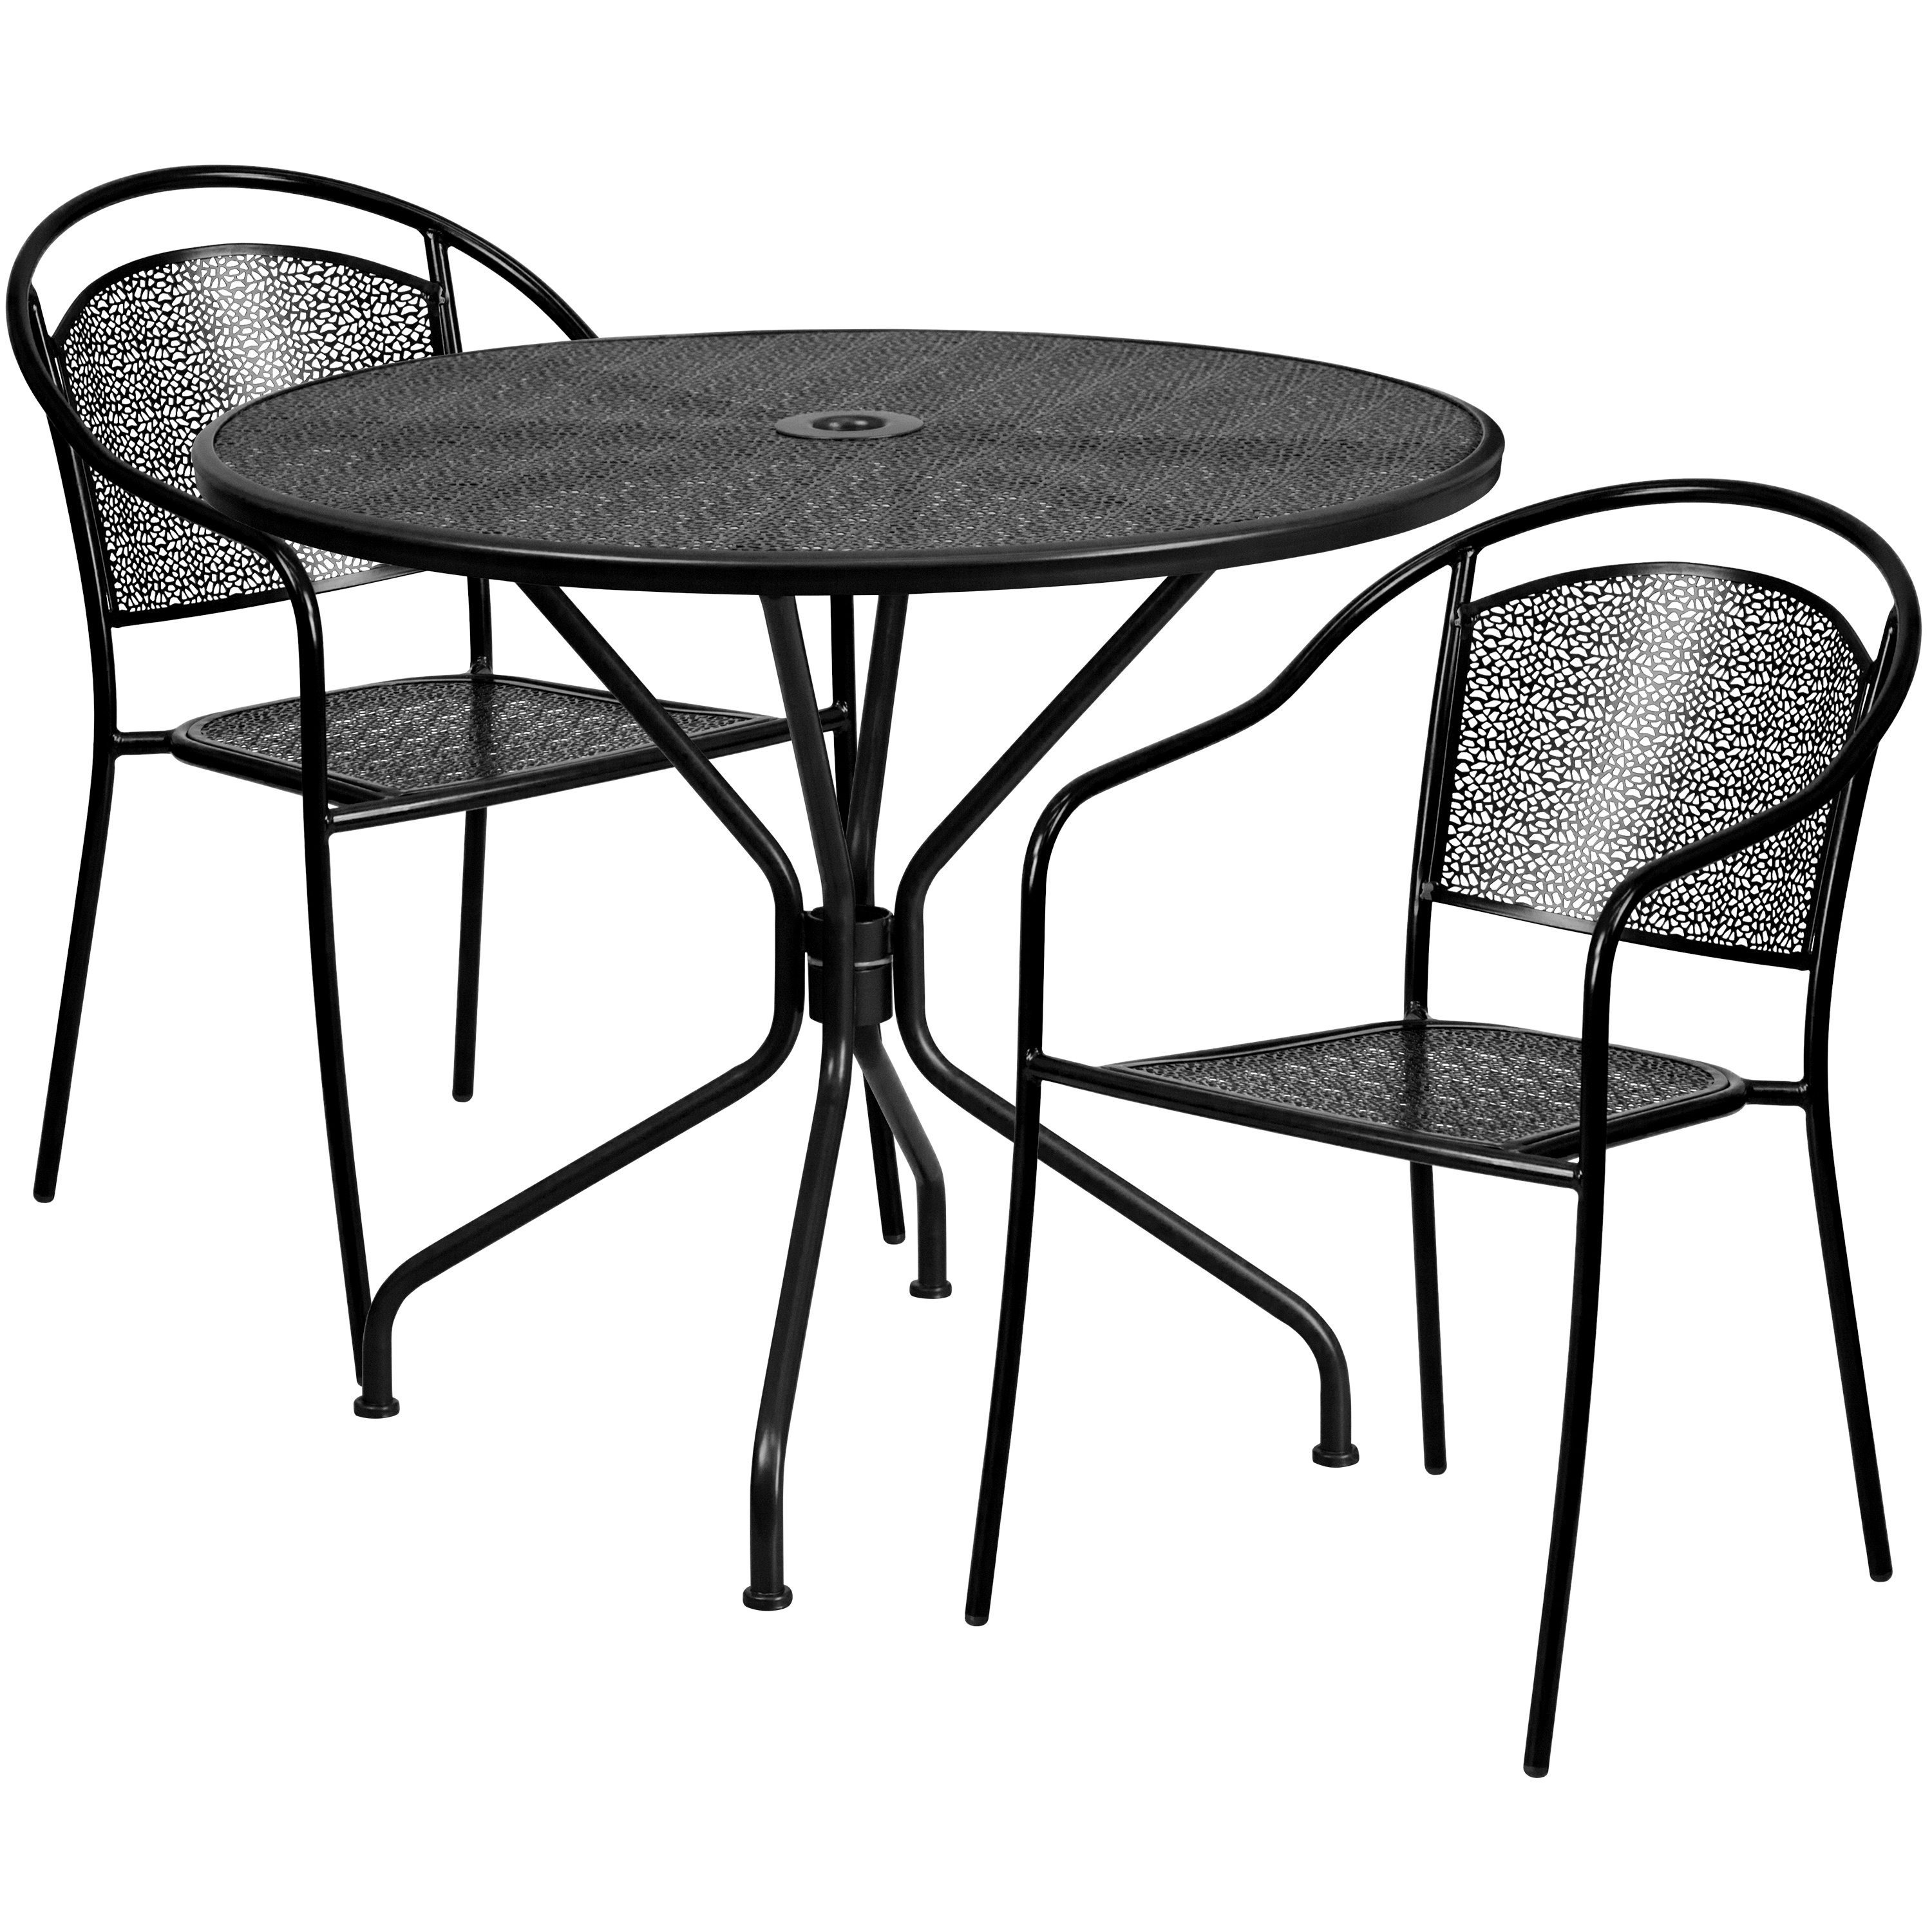 Flash Furniture CO-35RD-03CHR2-BK-GG 35.25" Round Black Indoor/Outdoor Steel Patio Table Set with 2 Round Back Chairs